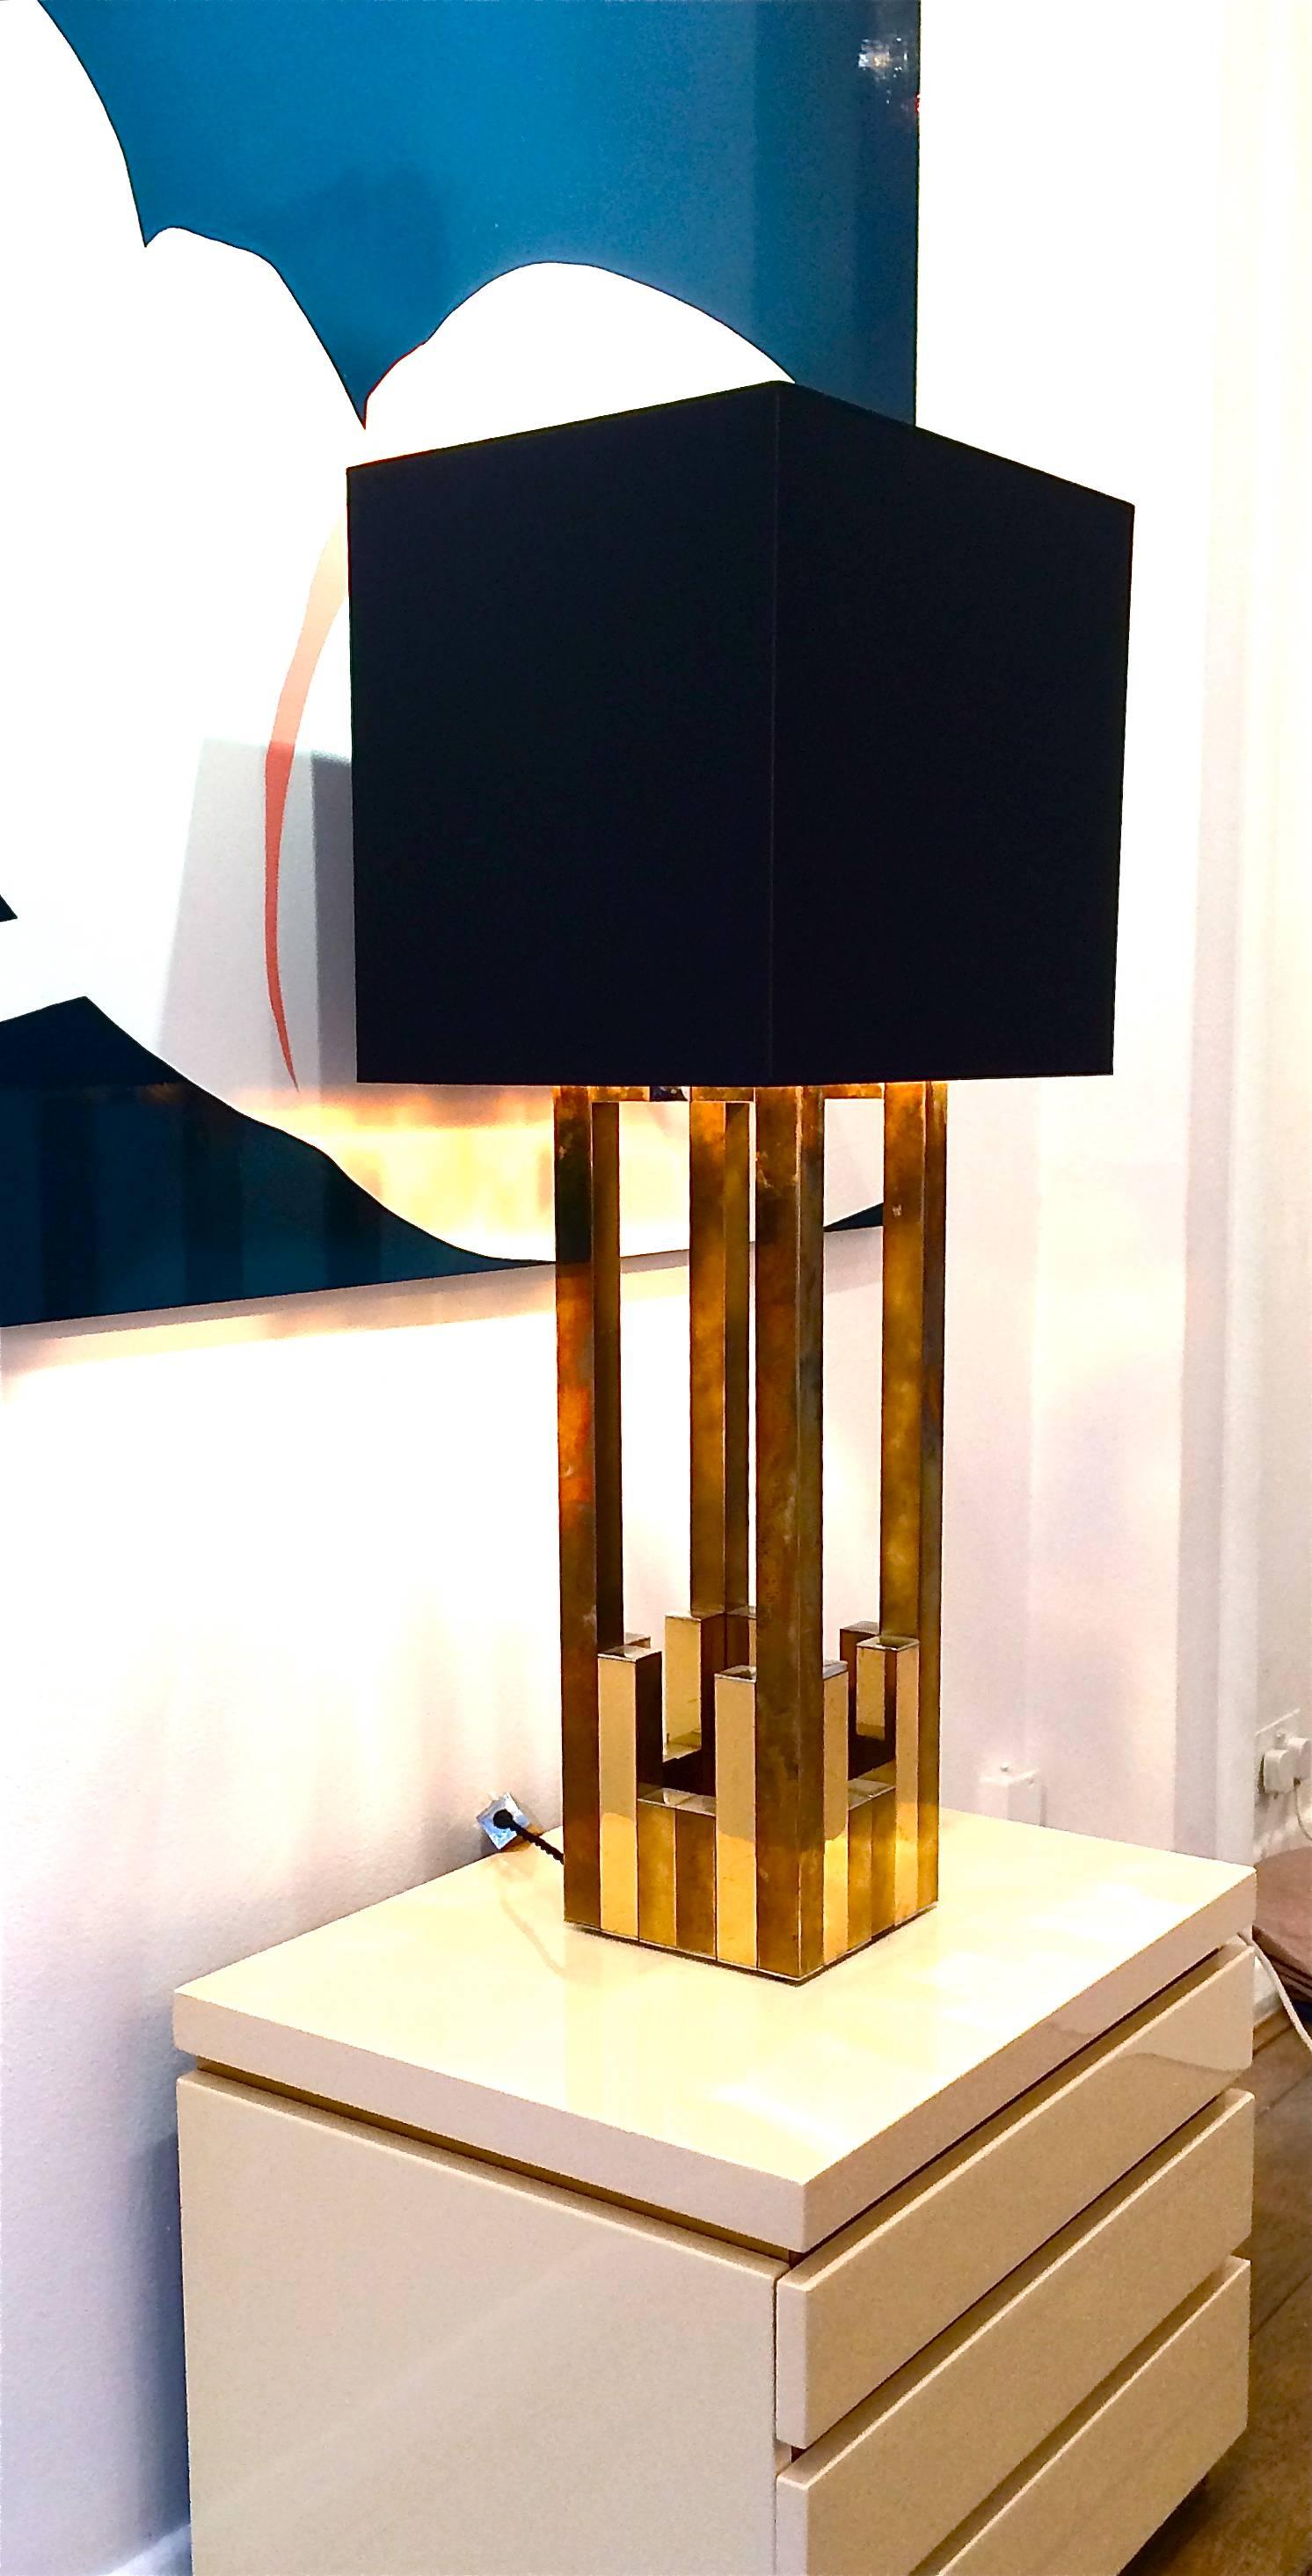 A large Willy Rizzo chrome and gilt lamp by Lumica with original switch with Lumica label on and large, new bespoke, square black shade with gold interior. Re wired with black cord flex and PAT tested for UK fittings.